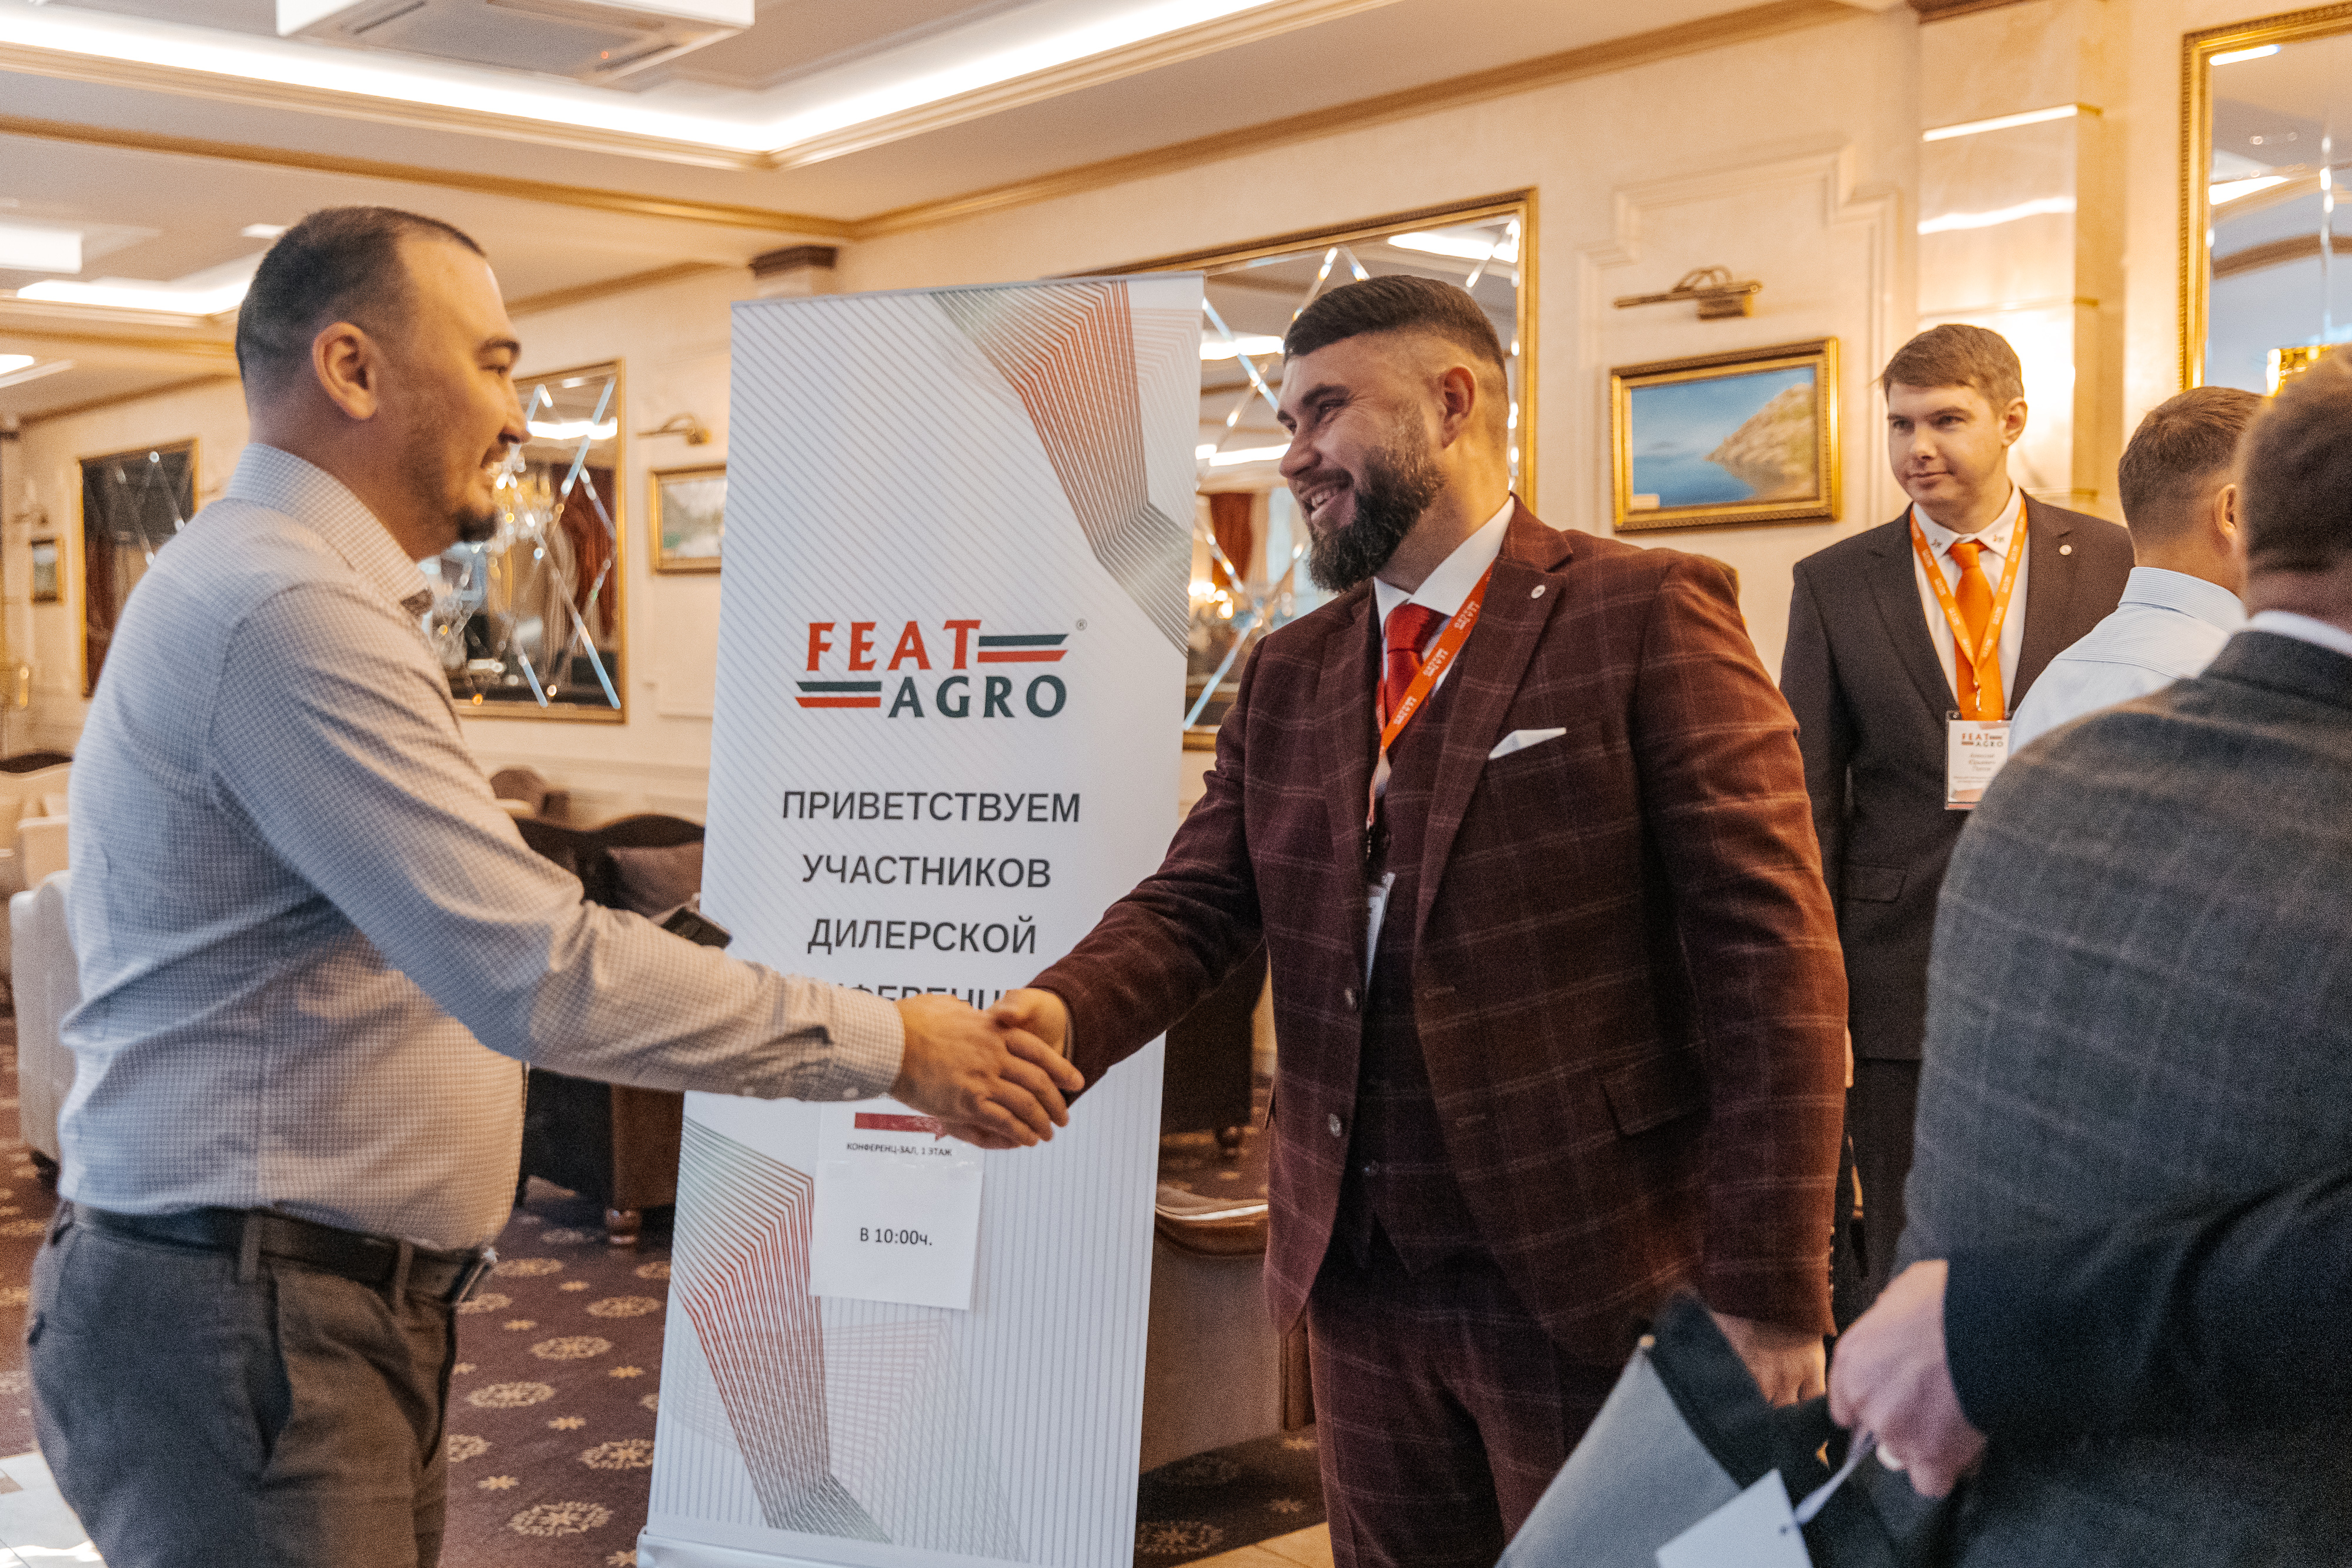 VI dealer conference of the FEATAGRO brand was held in Barnaul from January 23 to 24